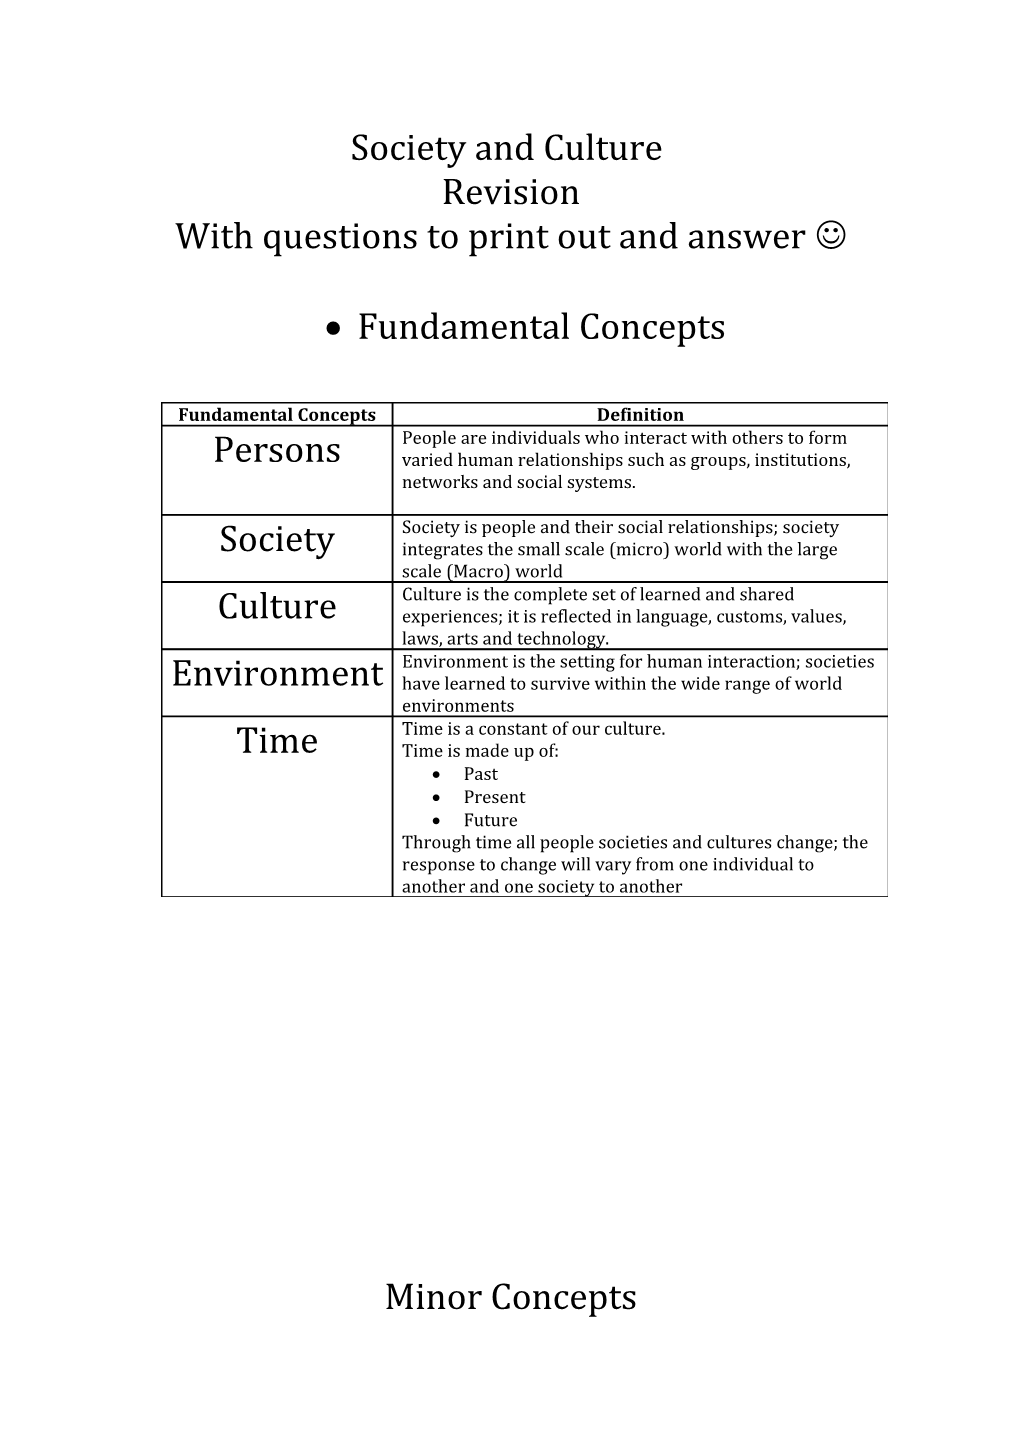 With Questions to Print out and Answer